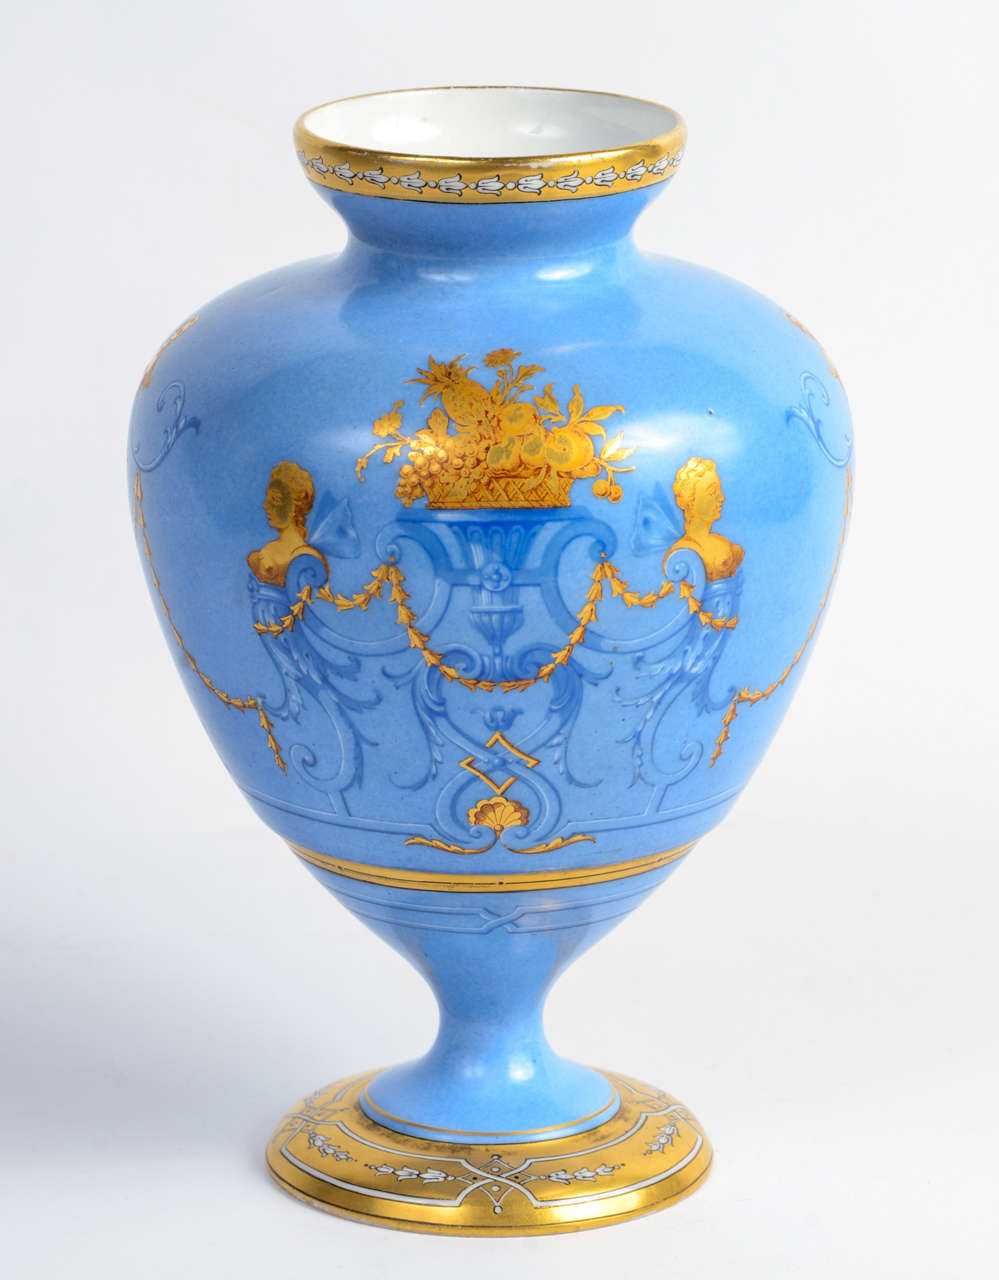 Very elegant porcelain vase with blue background gold decor representing a woman's busts and flower baskets surrounded with pearl garlands.
Bears the mark of 